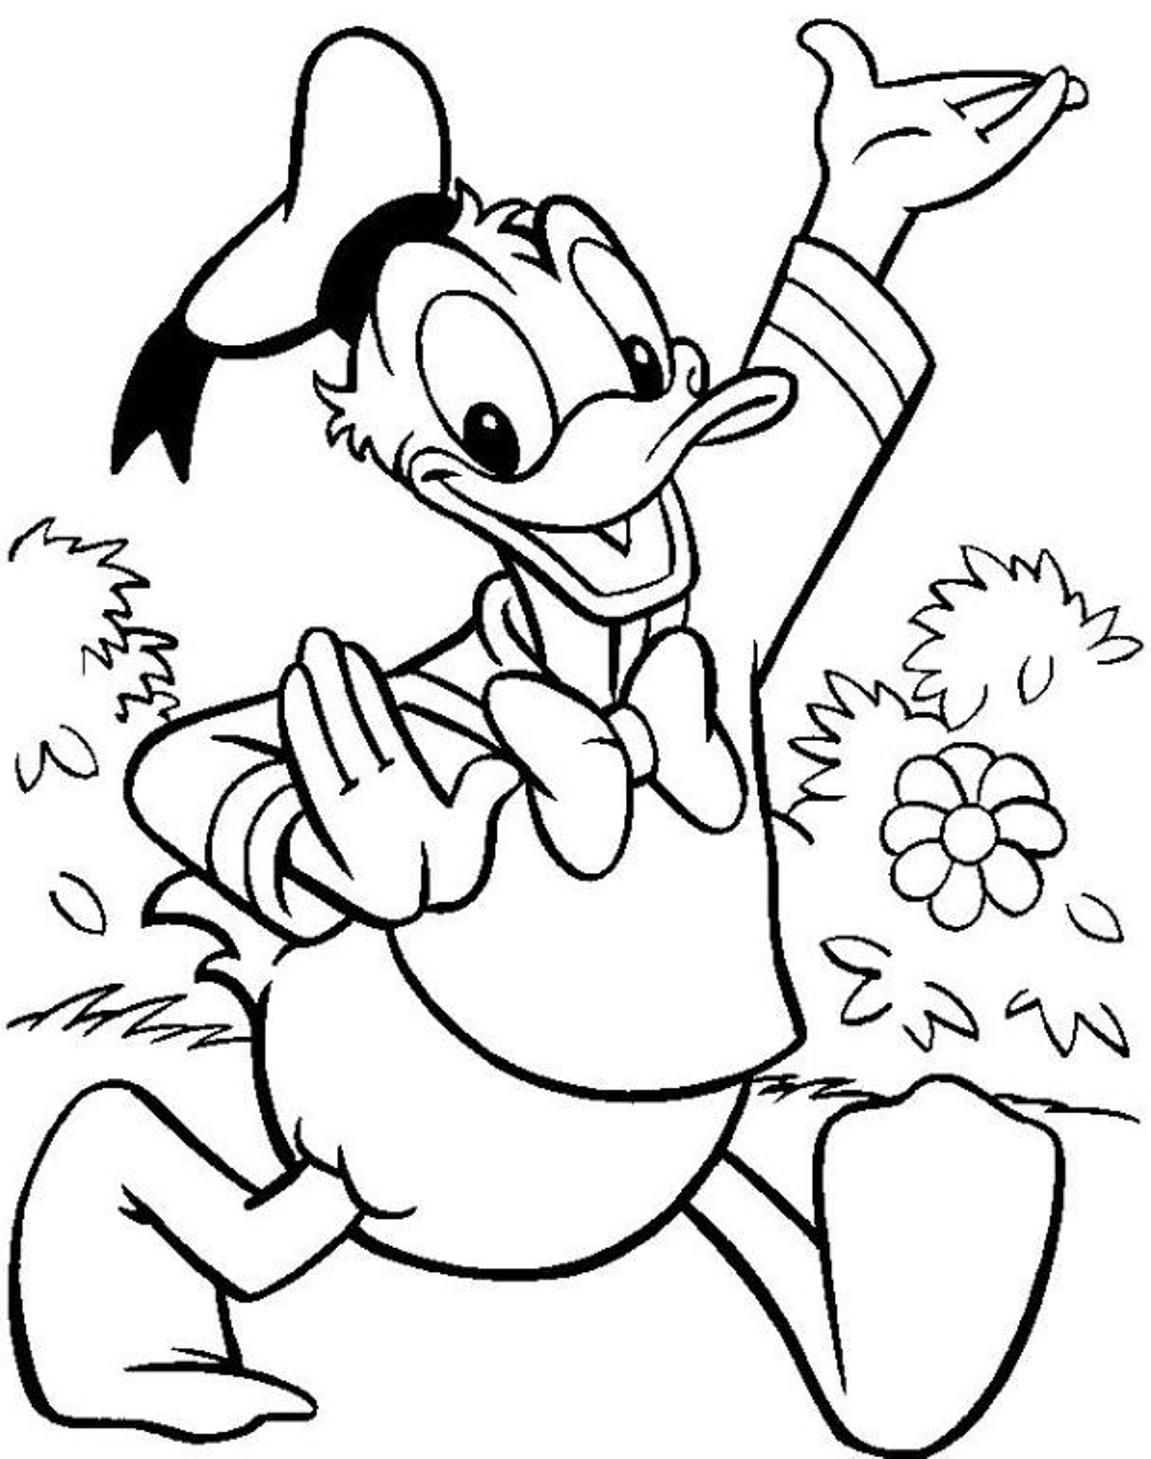 Printable Alphabet Coloring Pages D For Duck | Alphabet Coloring ...